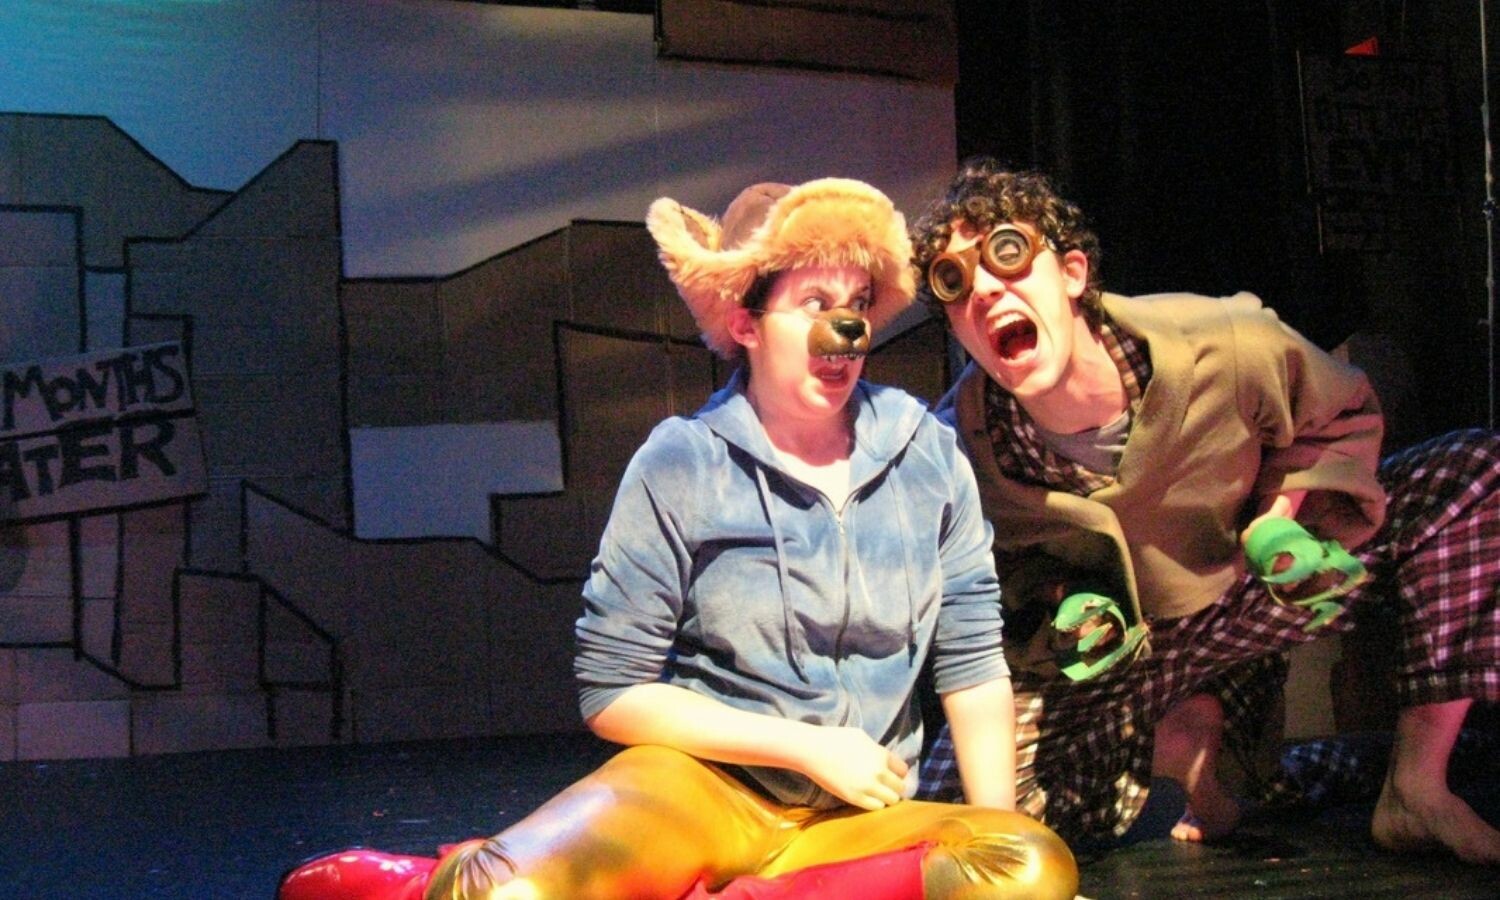 An actor dressed as a lion sitting onstage next to another actor dressed in brown. Both appear to be screaming.